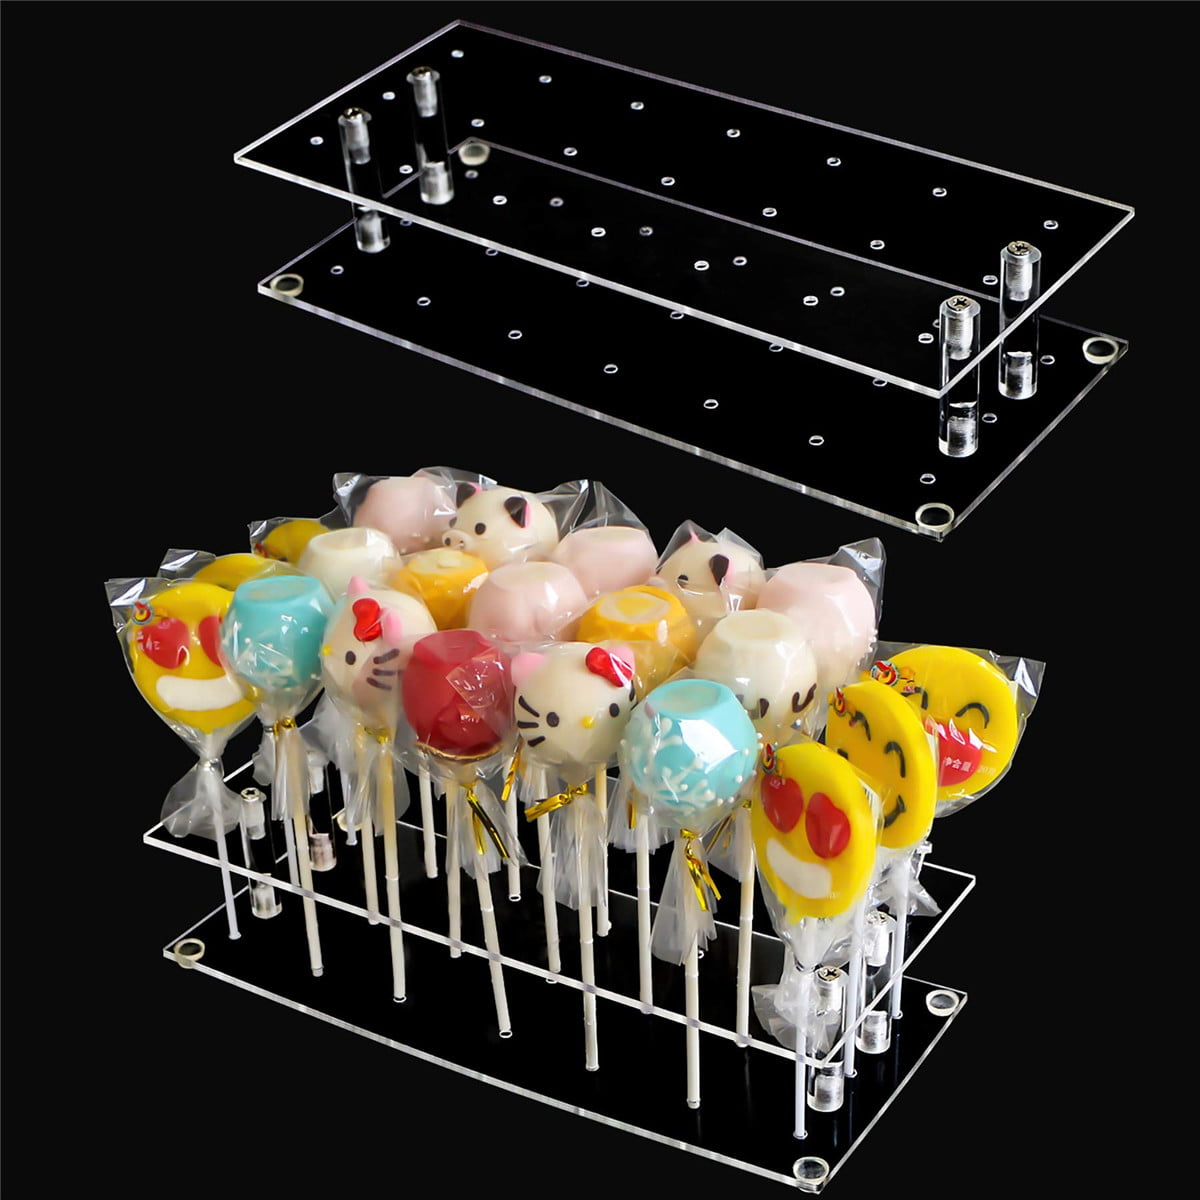 Disney Inspired Mouse Shaped FAKE Candy LolliPops Tiered Tray Decor